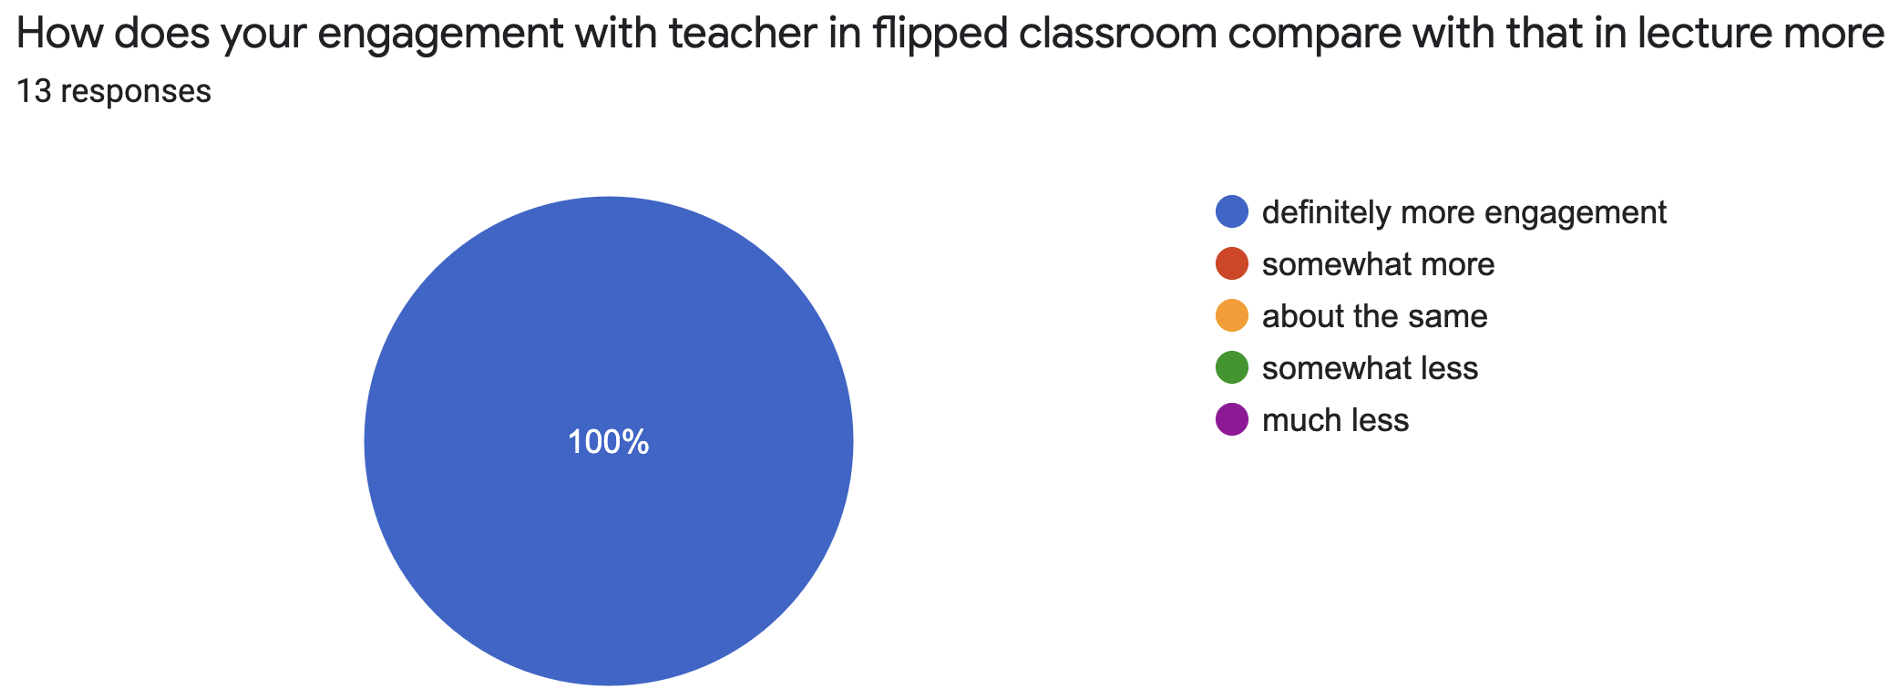 Pie chart indicates that 100% of surveyed students say the flipped classroom definitely results in more engagement with the teacher.